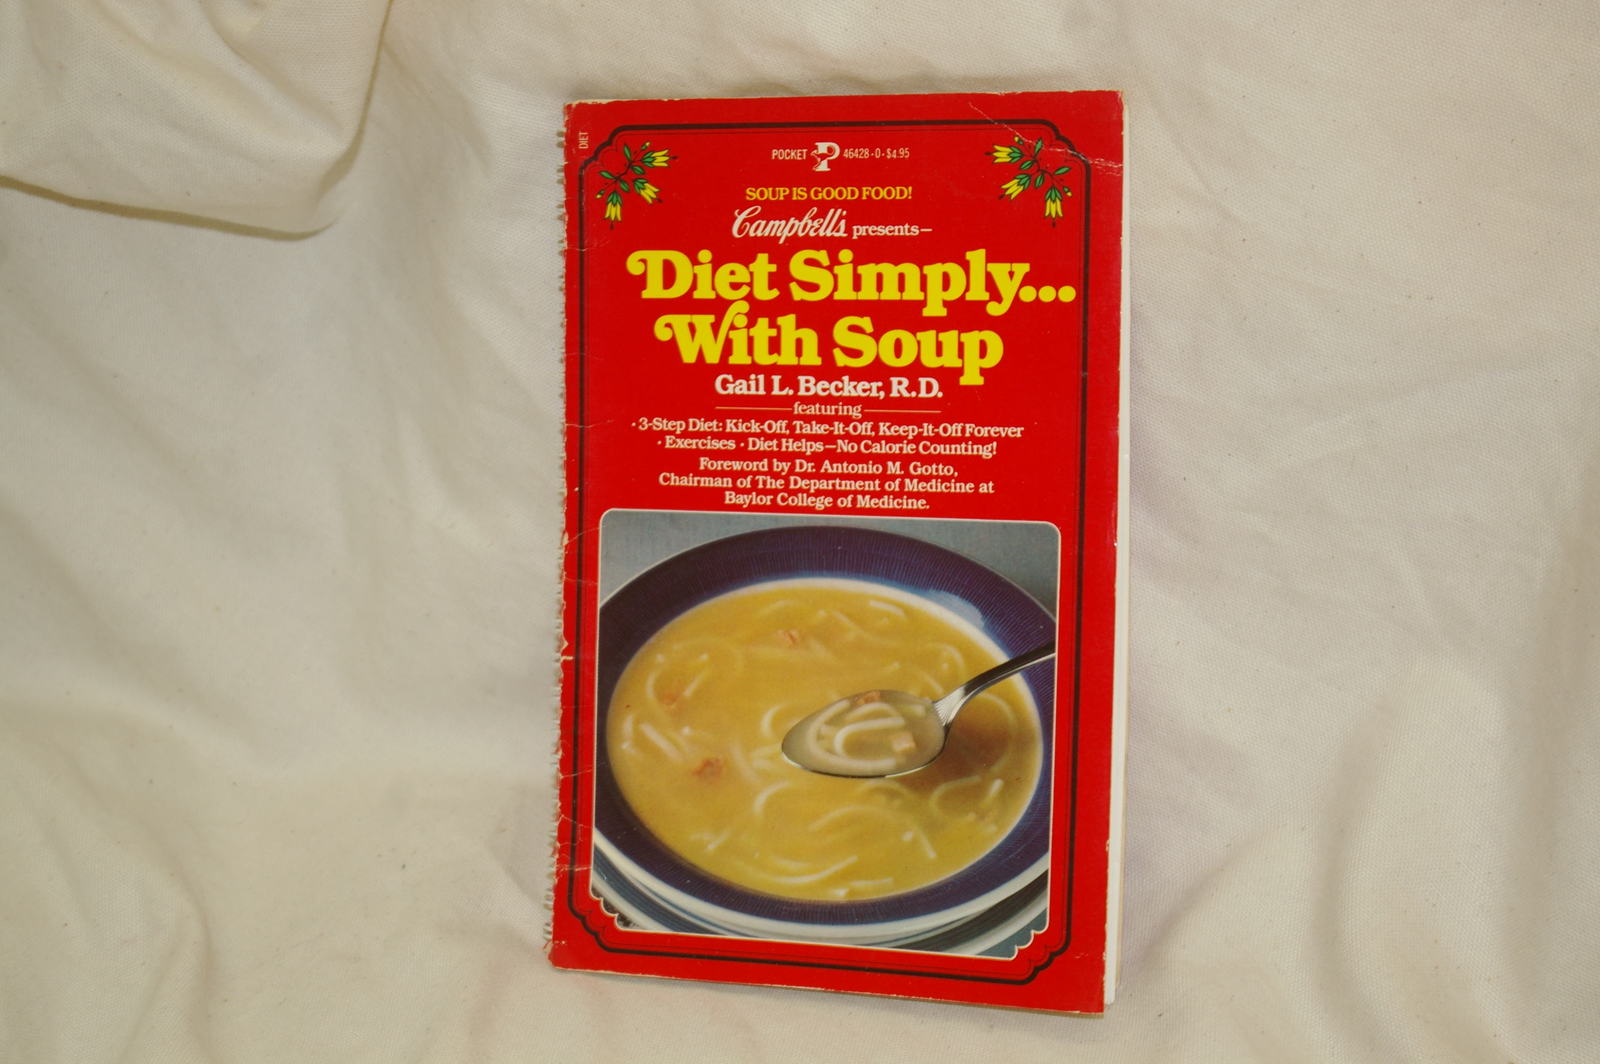 Campbell's Soup Presents - Diet Simply.. With Soup By Gail L Becker RD  Cookbook - $6.00